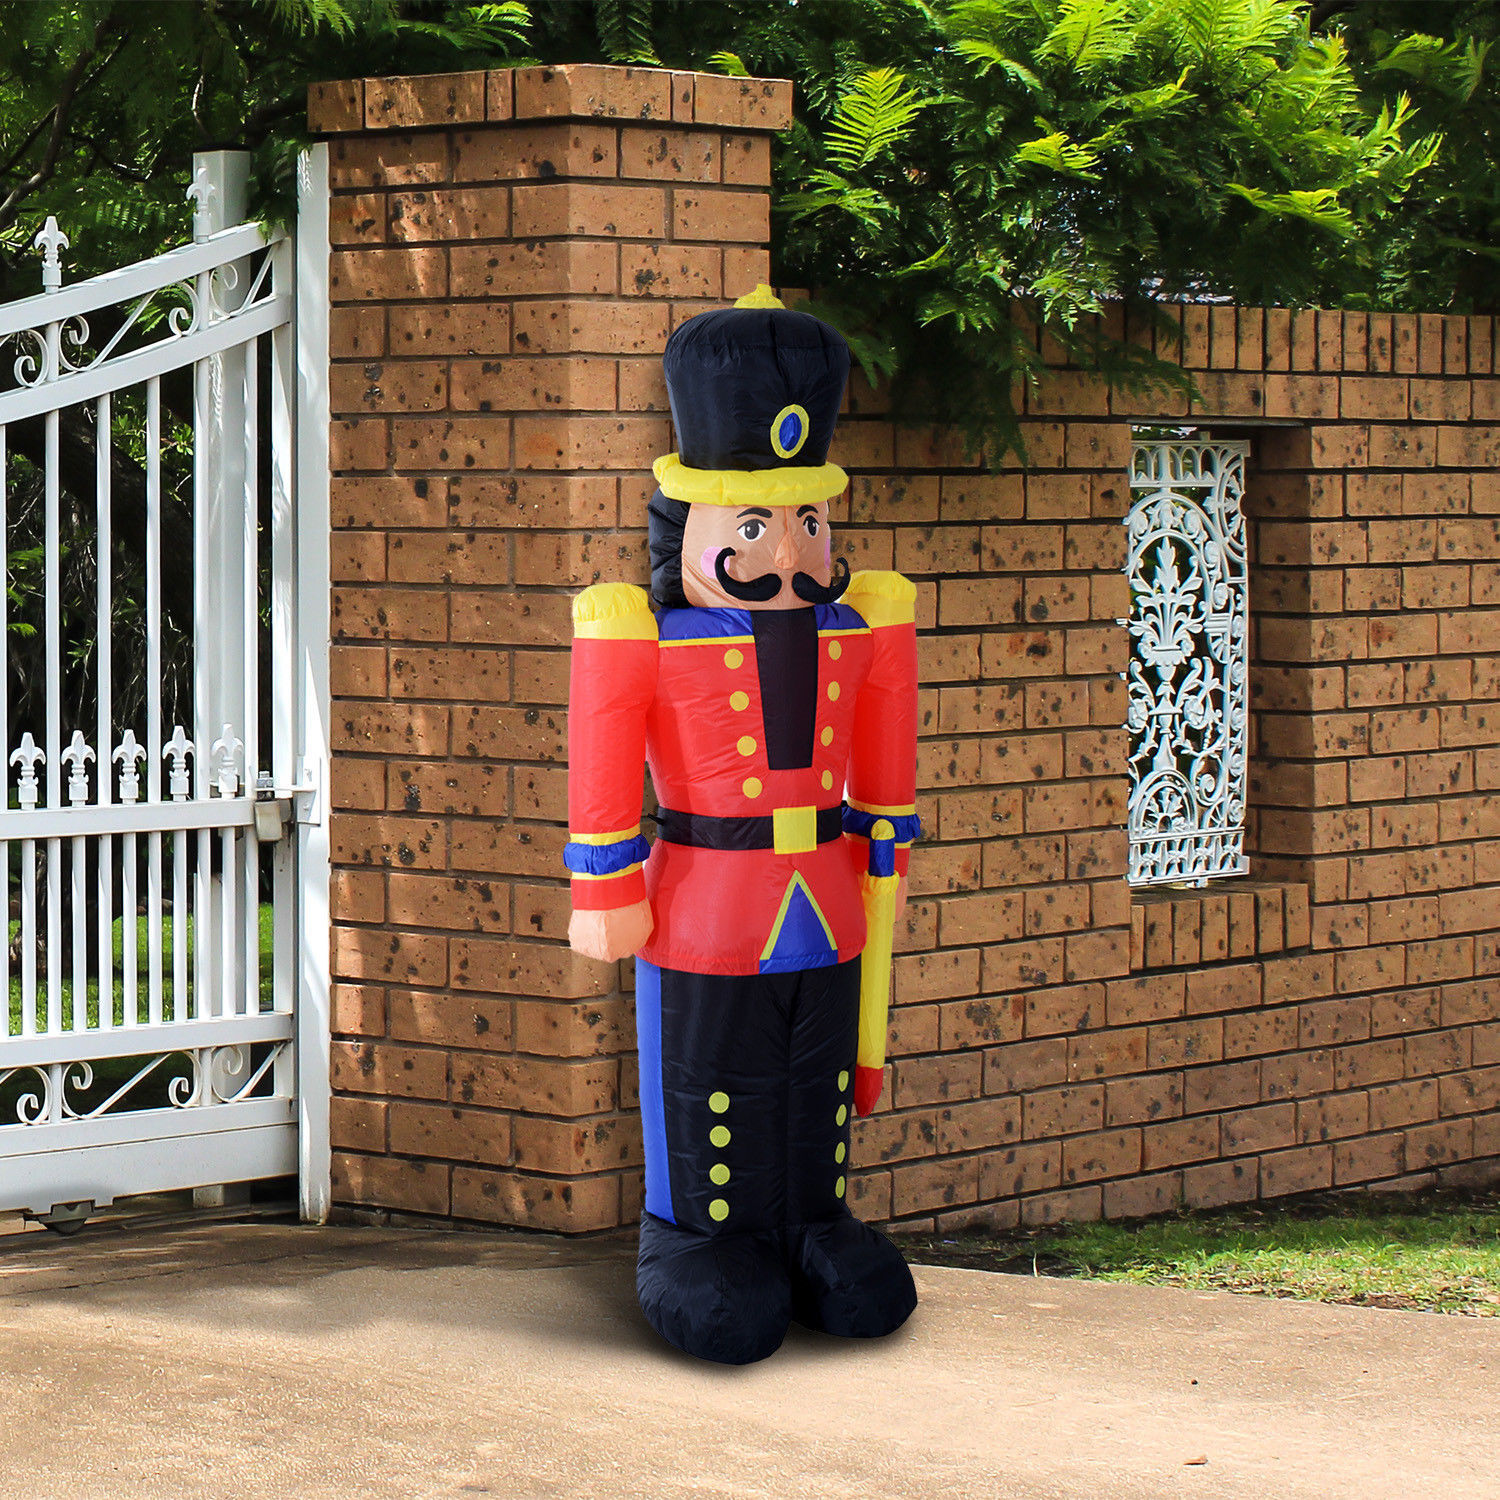 6' Inflatable Christmas Toy Nutcracker Soldier Blow-Up Outdoor Display w/ LEDs